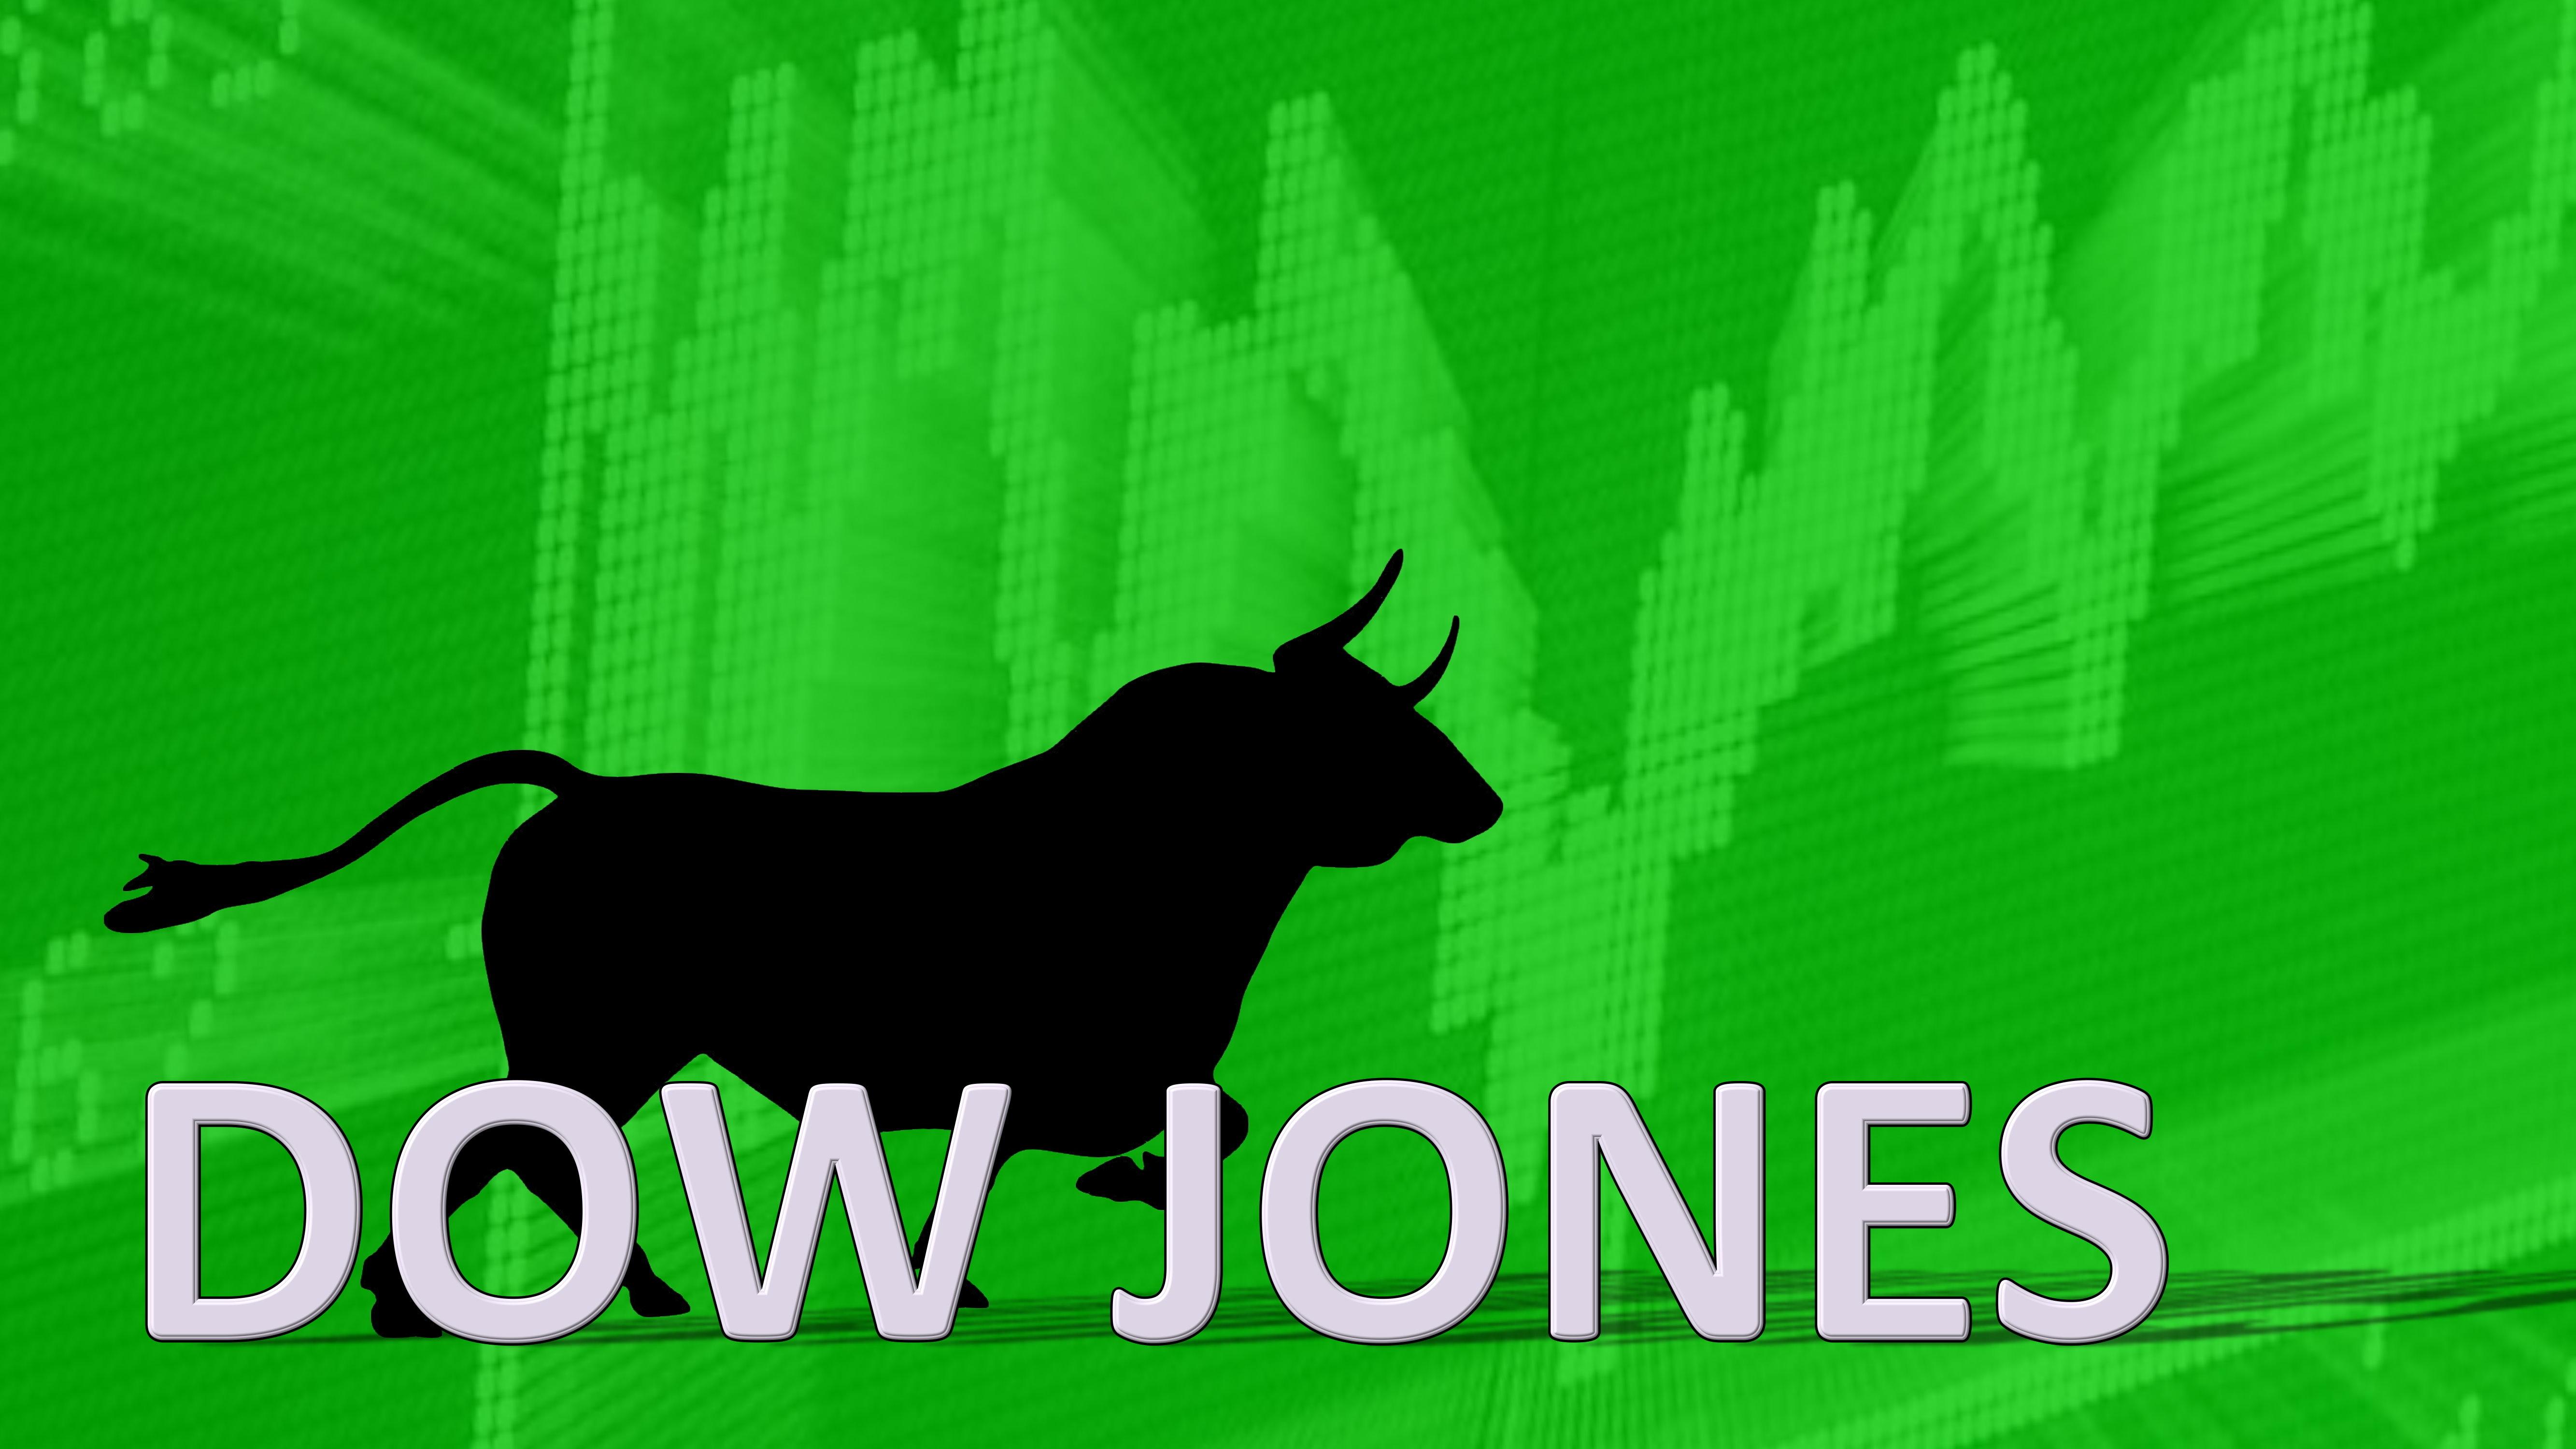 Dow Jones 2020 Outlook What’s Next after Trade Deal?